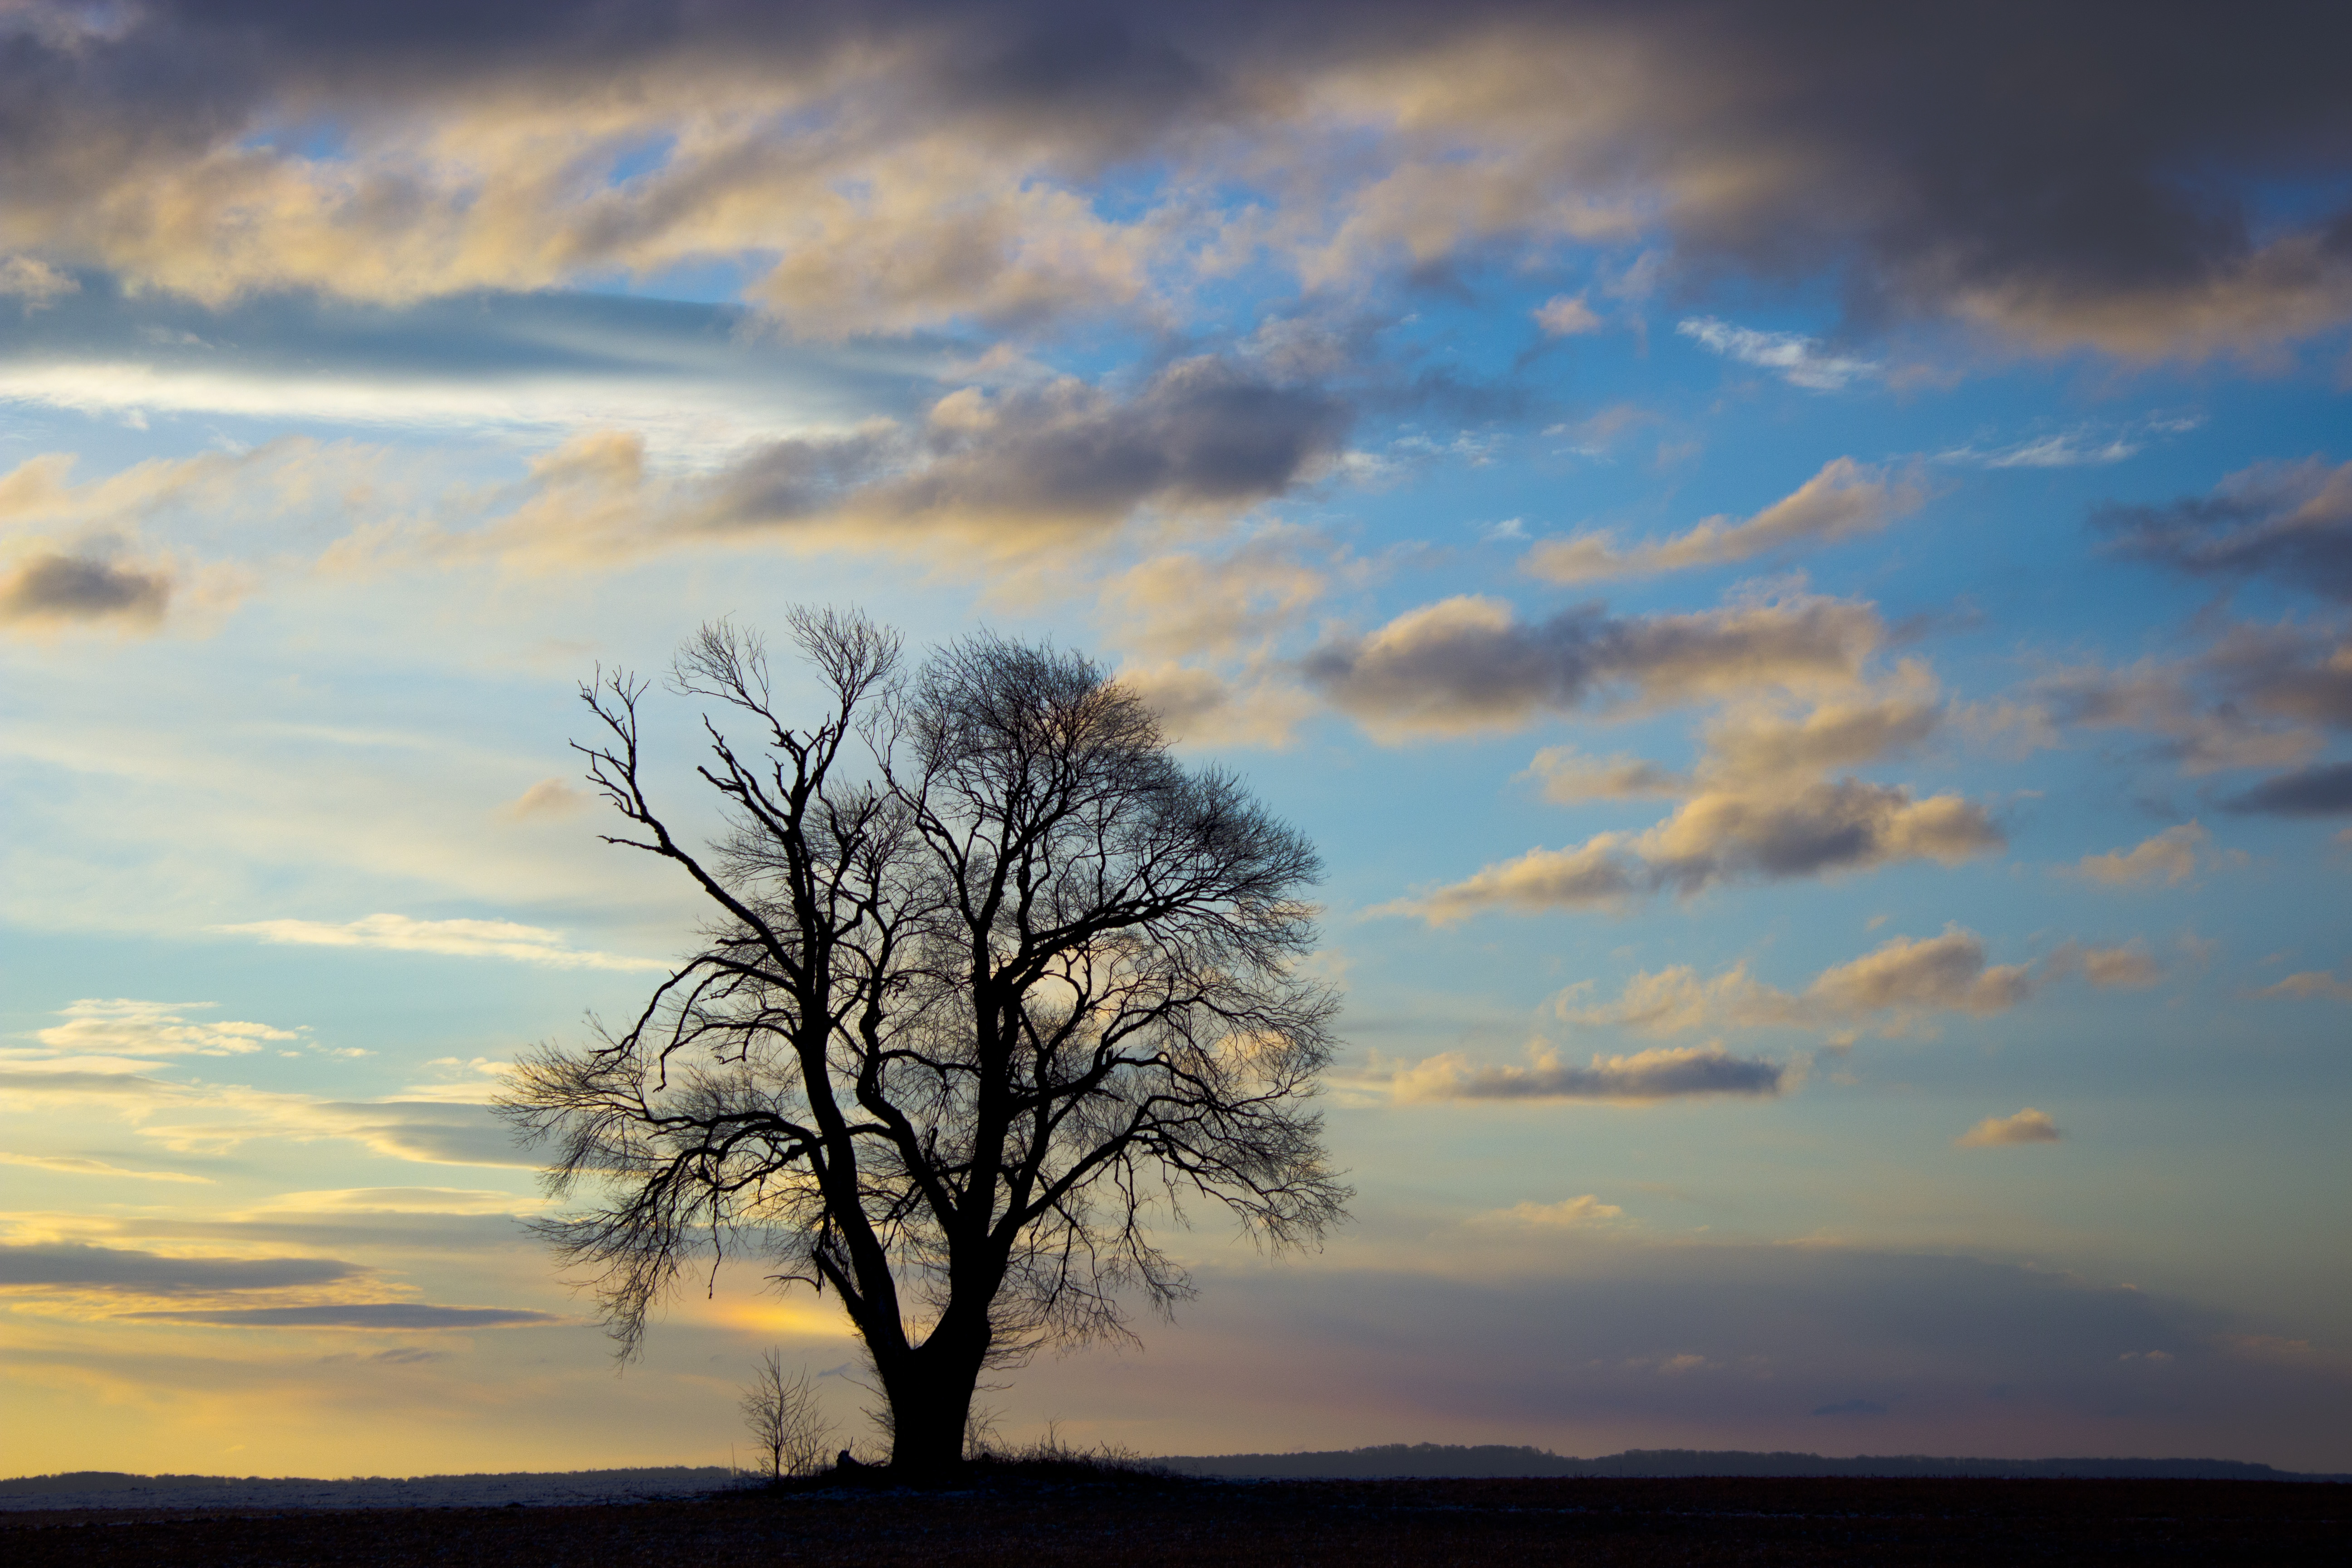 The Lonesome Tree